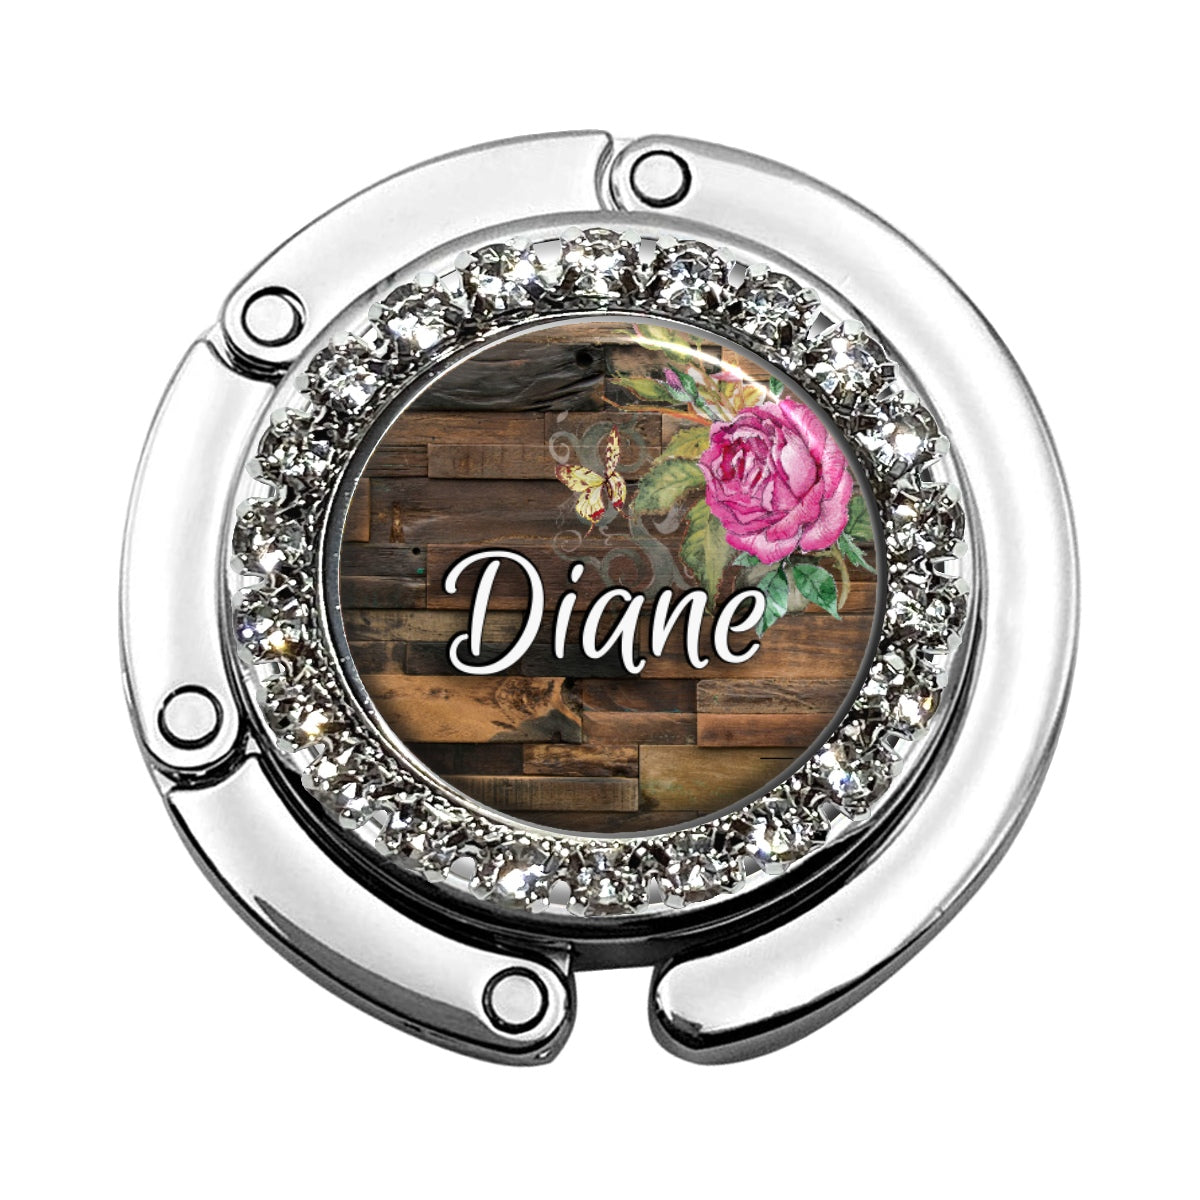 a wooden and crystal plate with a pink rose on it